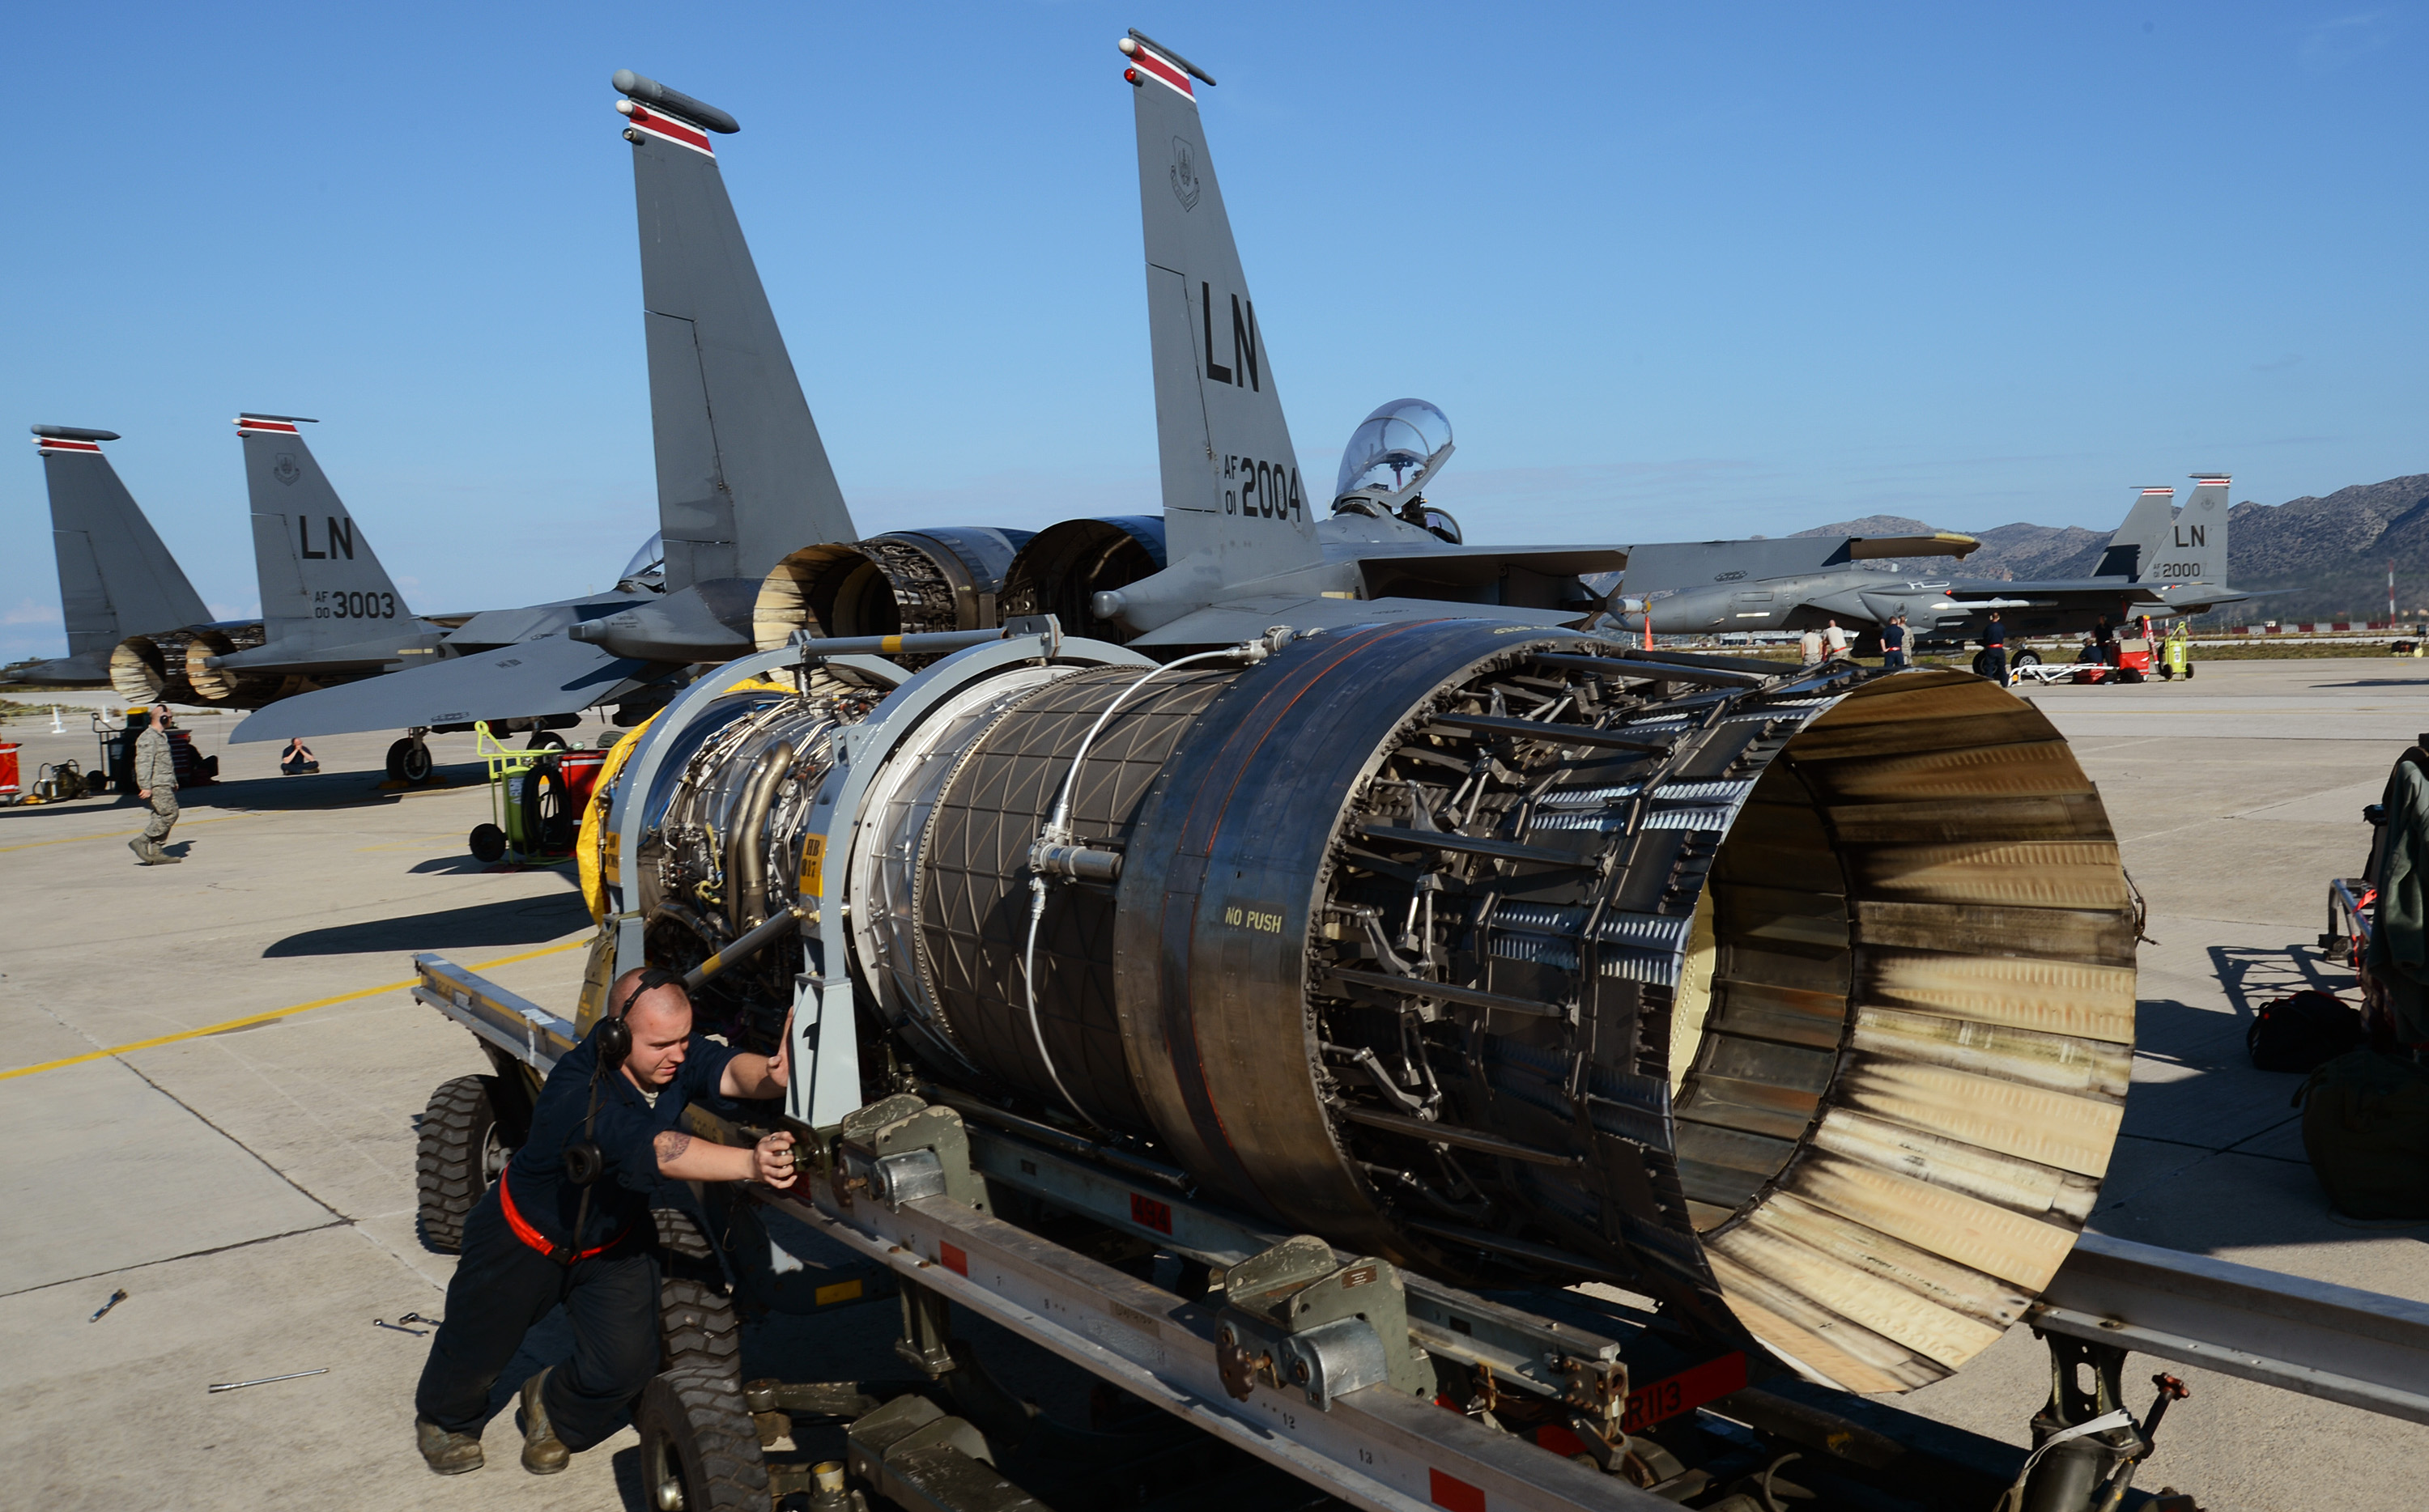 U.S._Air_Force_Senior_Airman_Christopher_Strader,_a_maintainer_with_the_494th_Expeditionary_Fighter_Squadron,_prepares_an_engine_for_replacement_into_an_F-15E_Strike_Eagle_aircraft_at_Souda_Air_Base,_Greece_140227-F-MY082-094.jpg